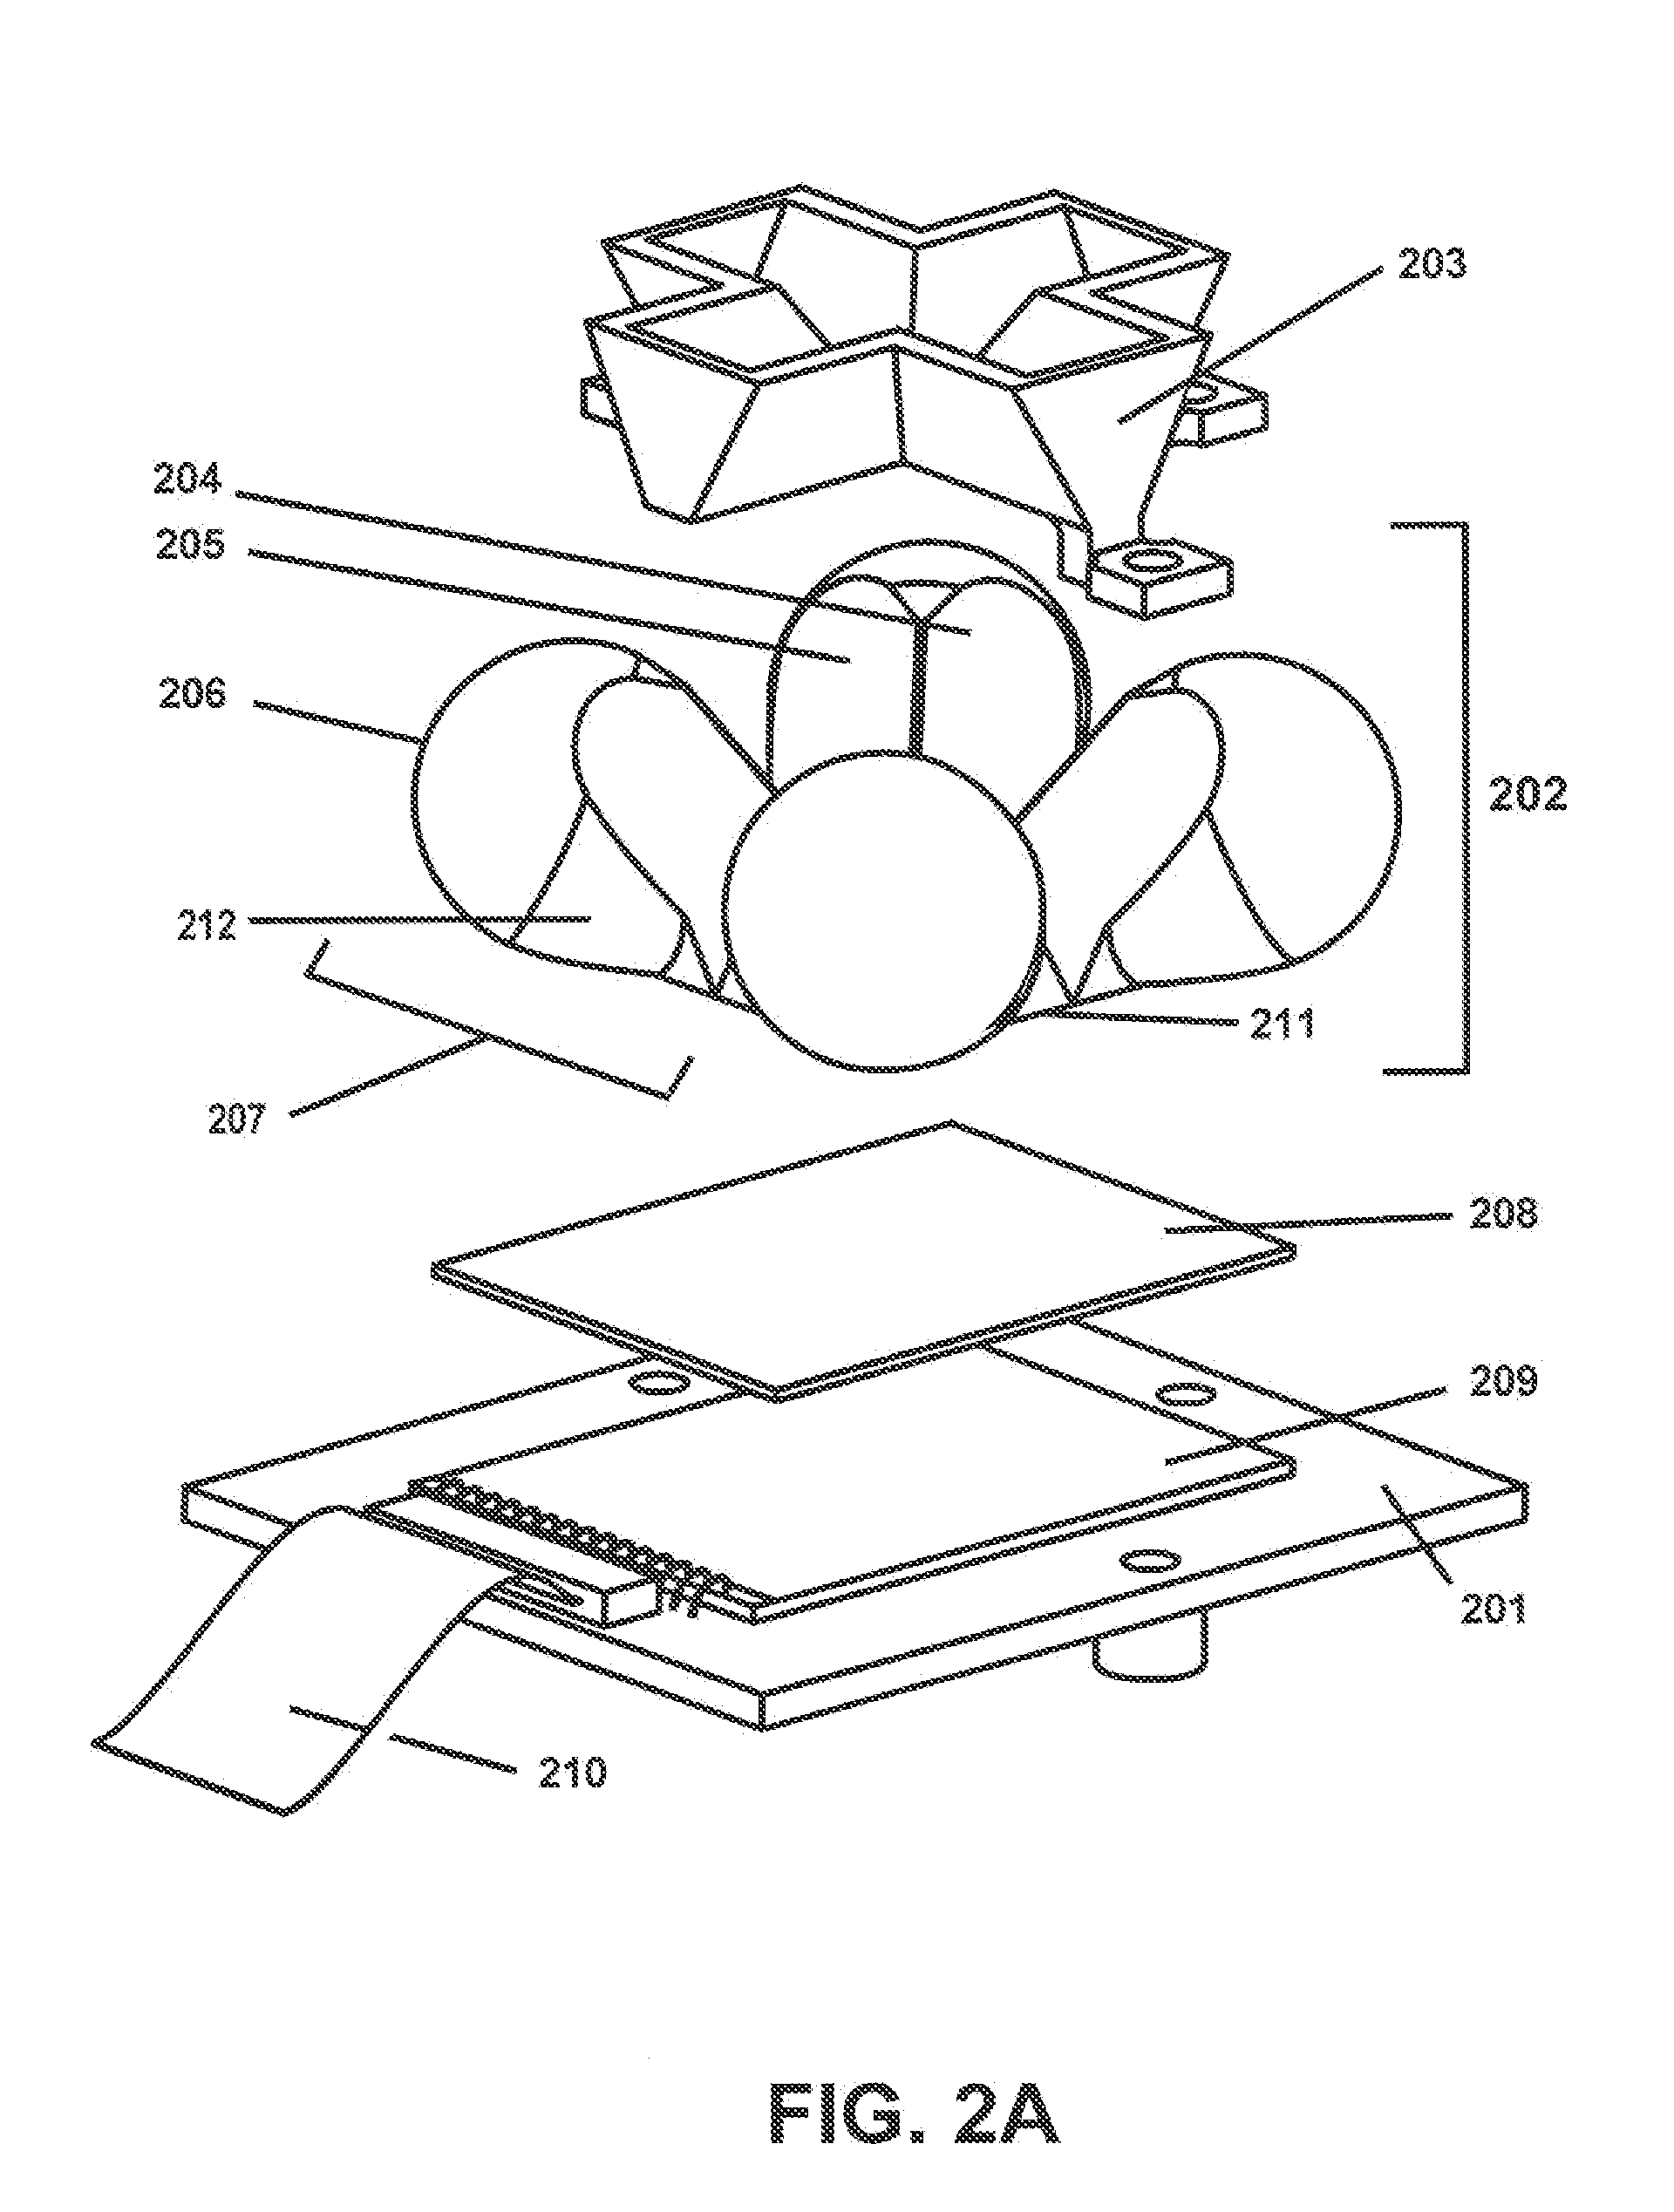 Apparatus and Methods for Locating Source of and Analyzing Electromagnetic Radiation